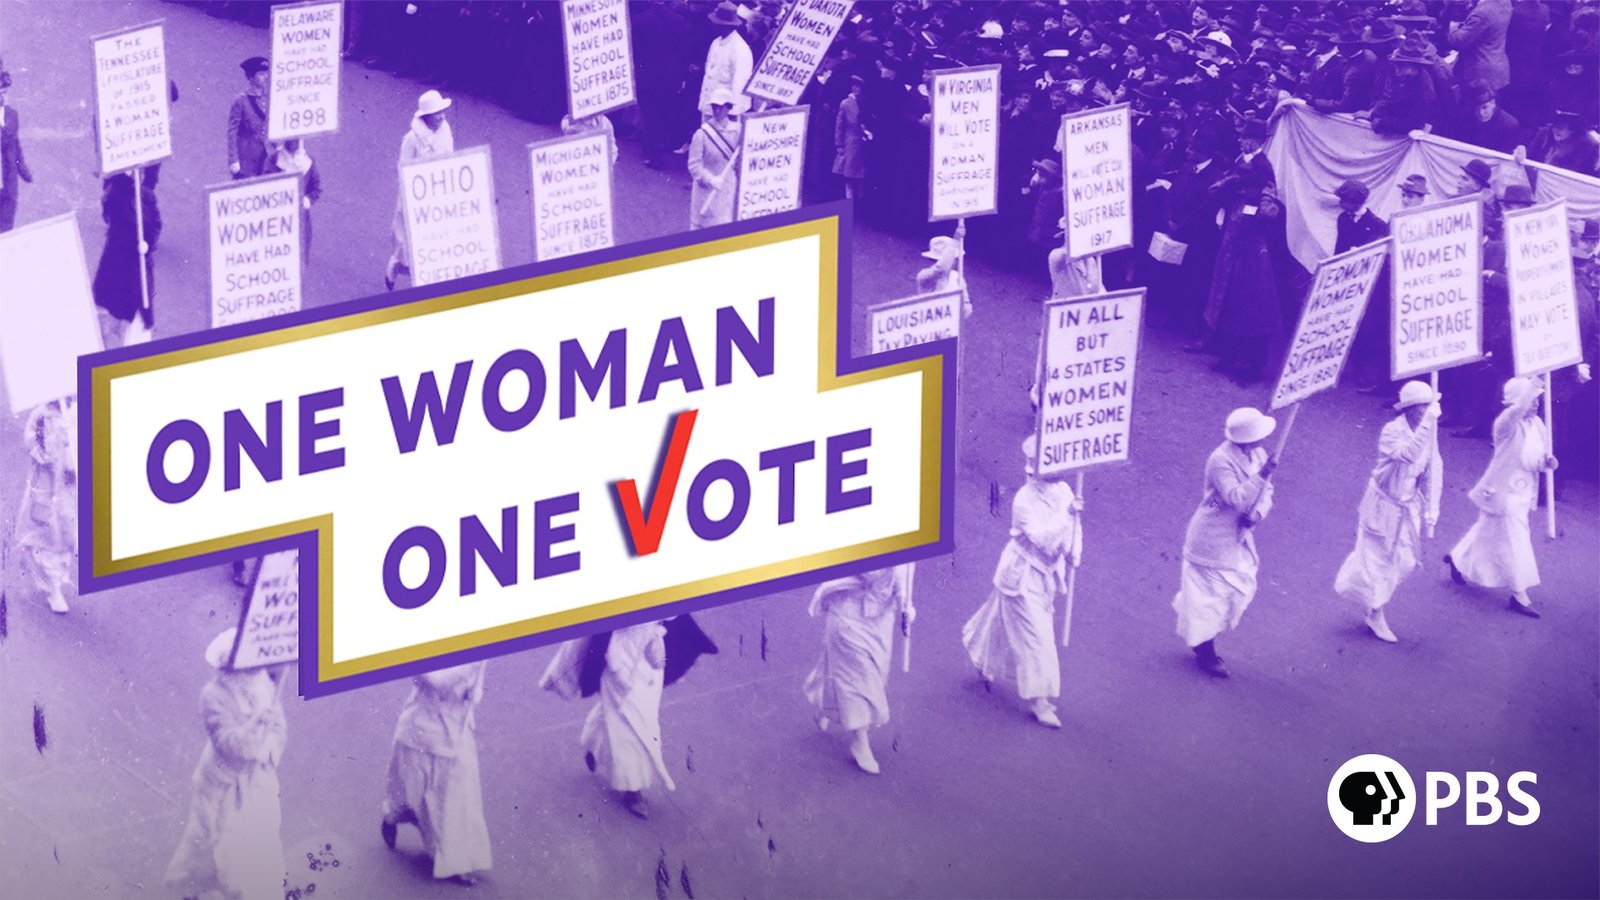 One Woman, One Vote